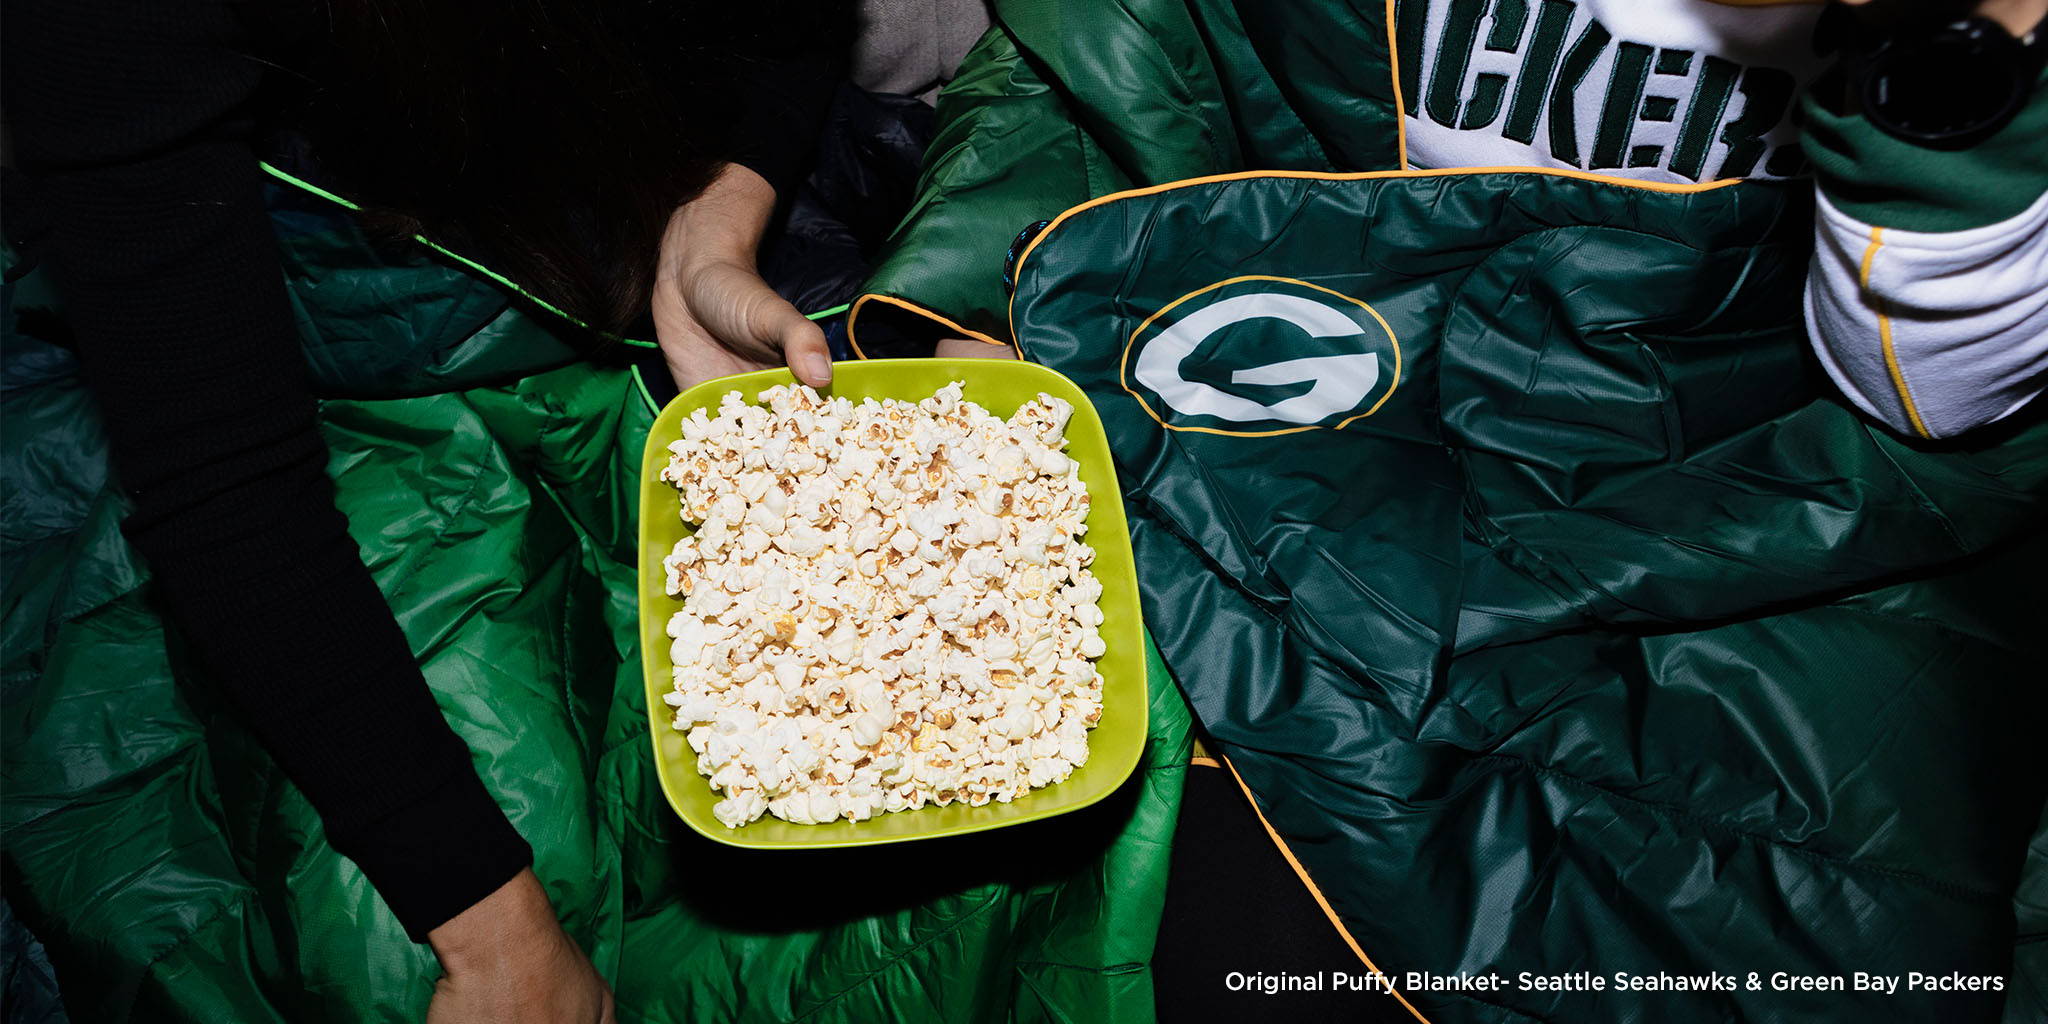 Two people wearing Rumpl NFL blankets with a bowl of popcorn